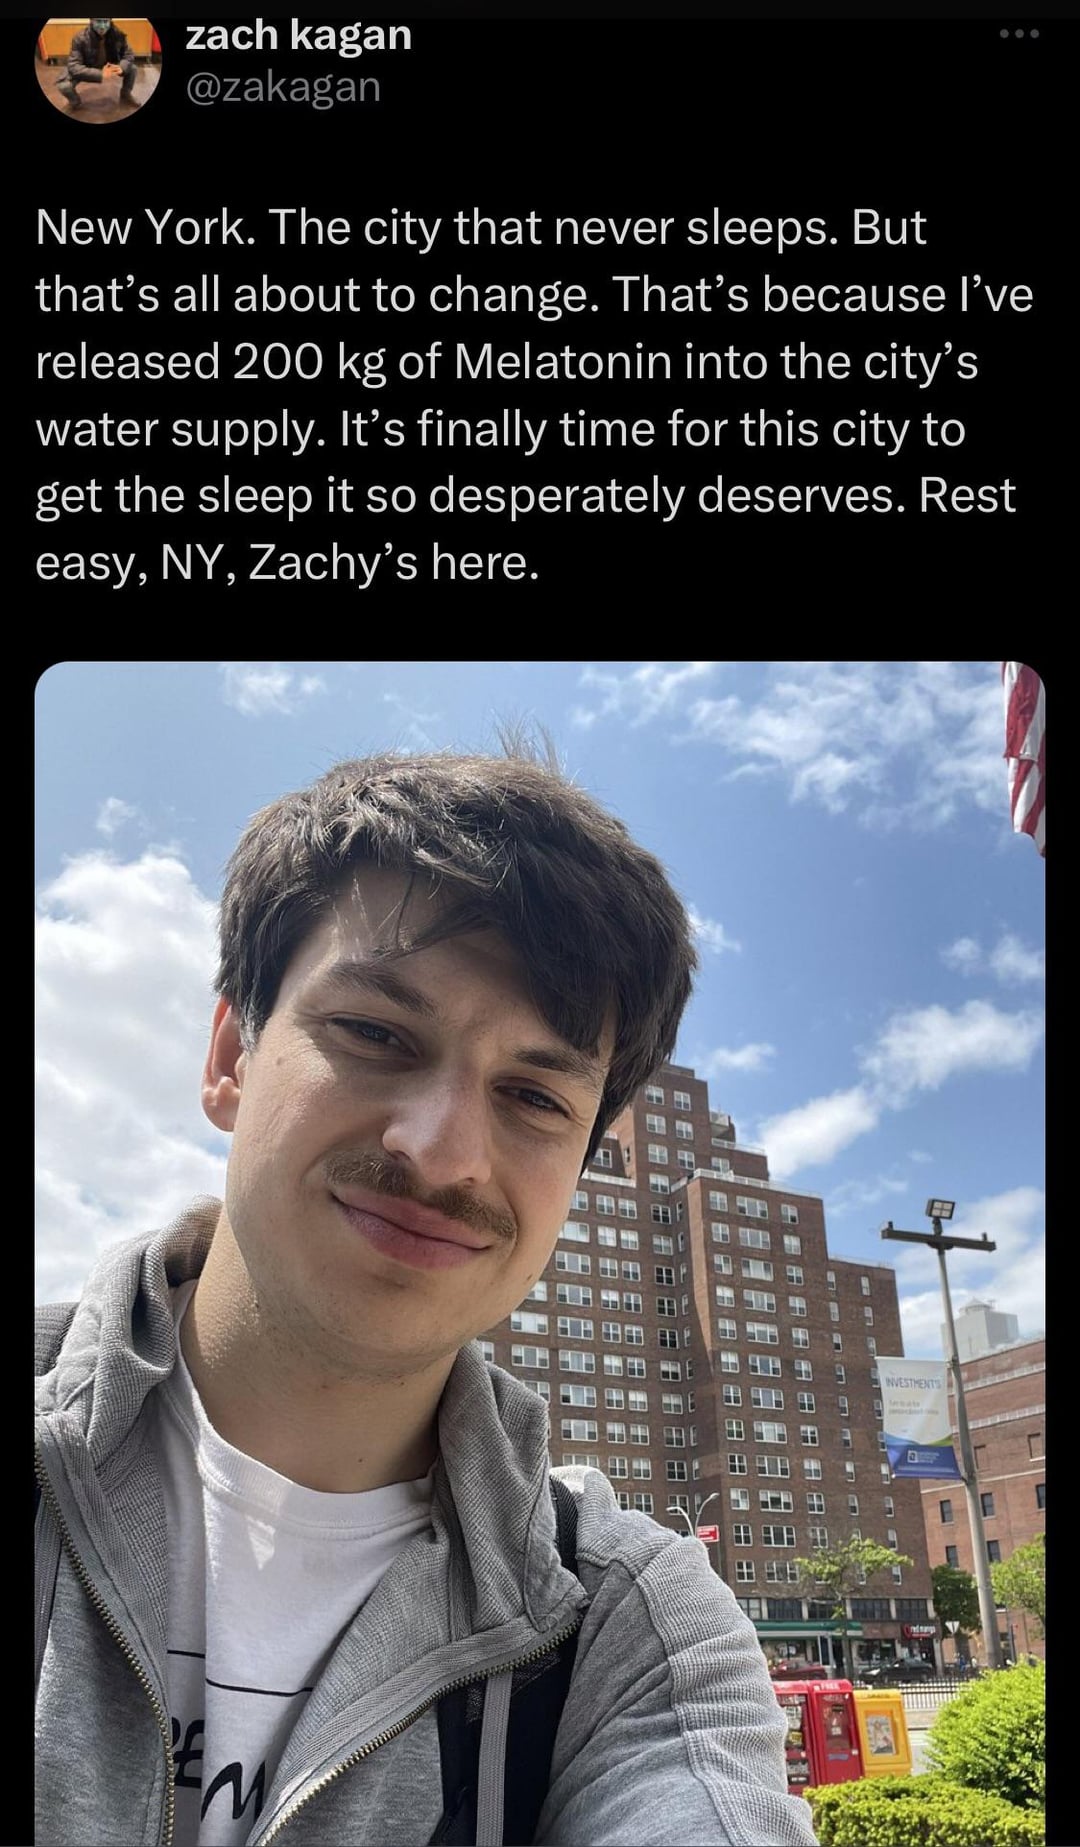 funniest tweets of the week - photo caption - zach kagan New York. The city that never sleeps. But that's all about to change. That's because I've released 200 kg of Melatonin into the city's water supply. It's finally time for this city to get the sleep 